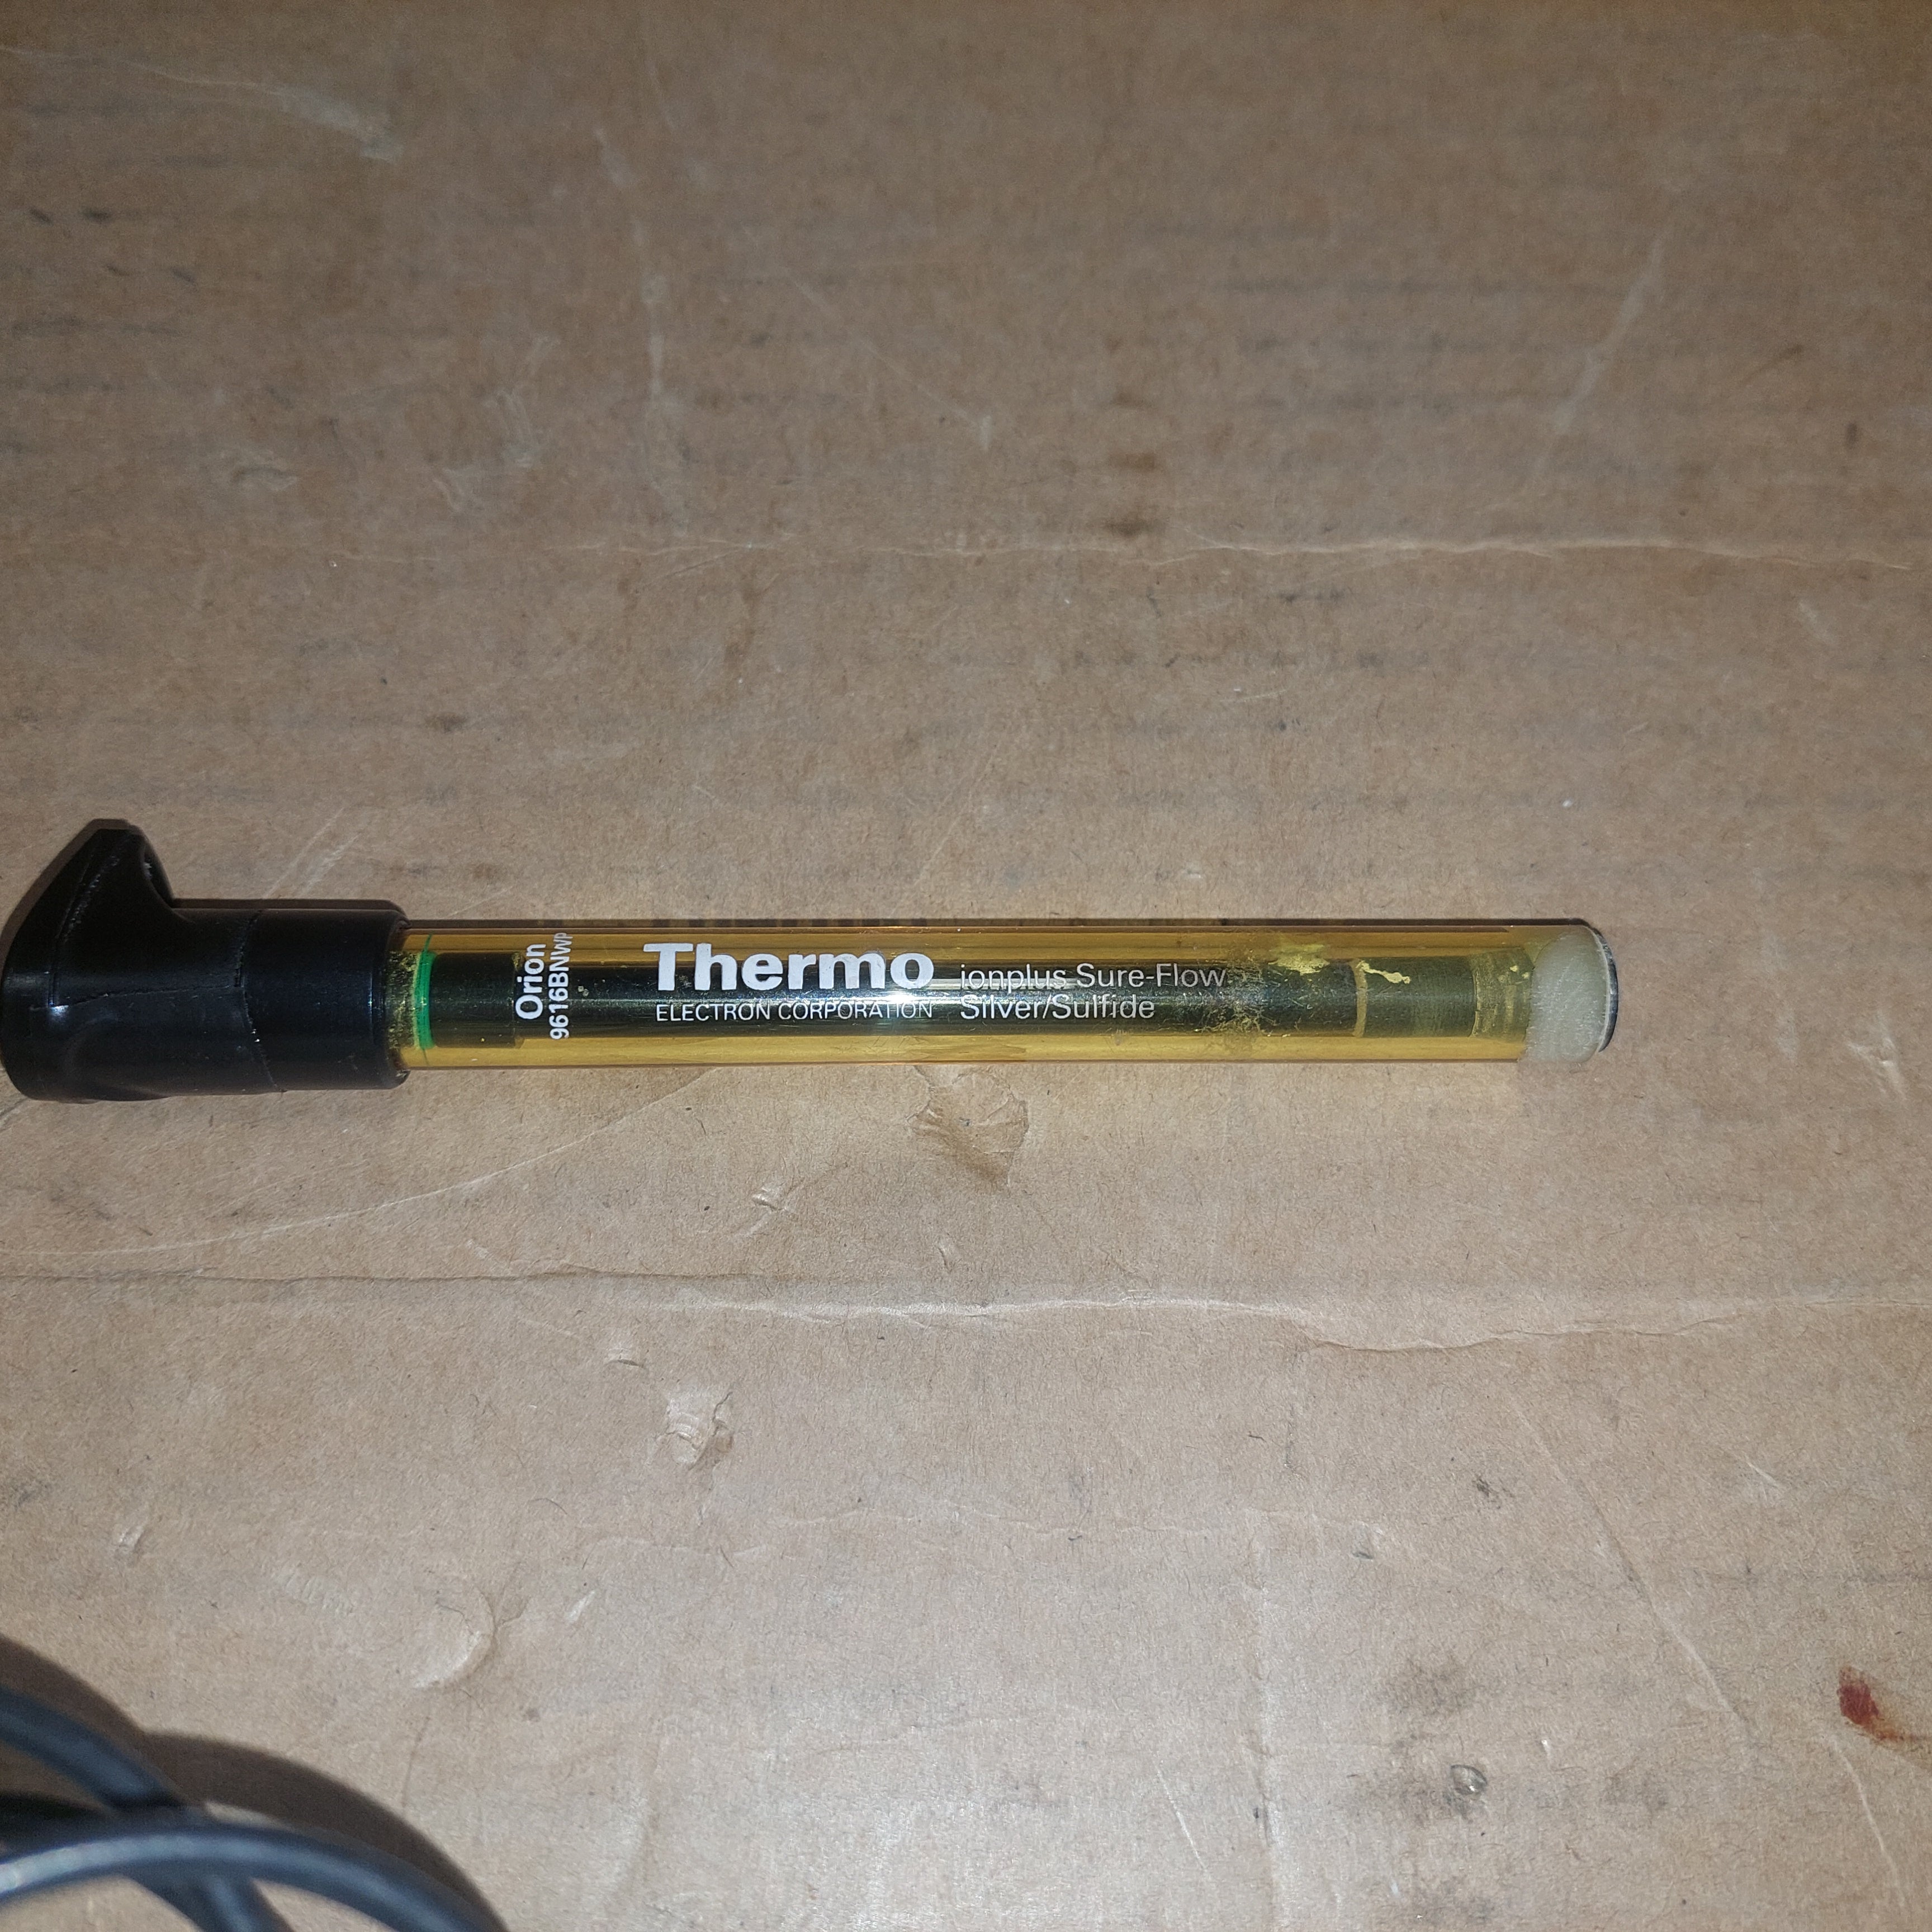 Thermo VWR 9616BNWP Silver/Sulfide ISE Electrode Used